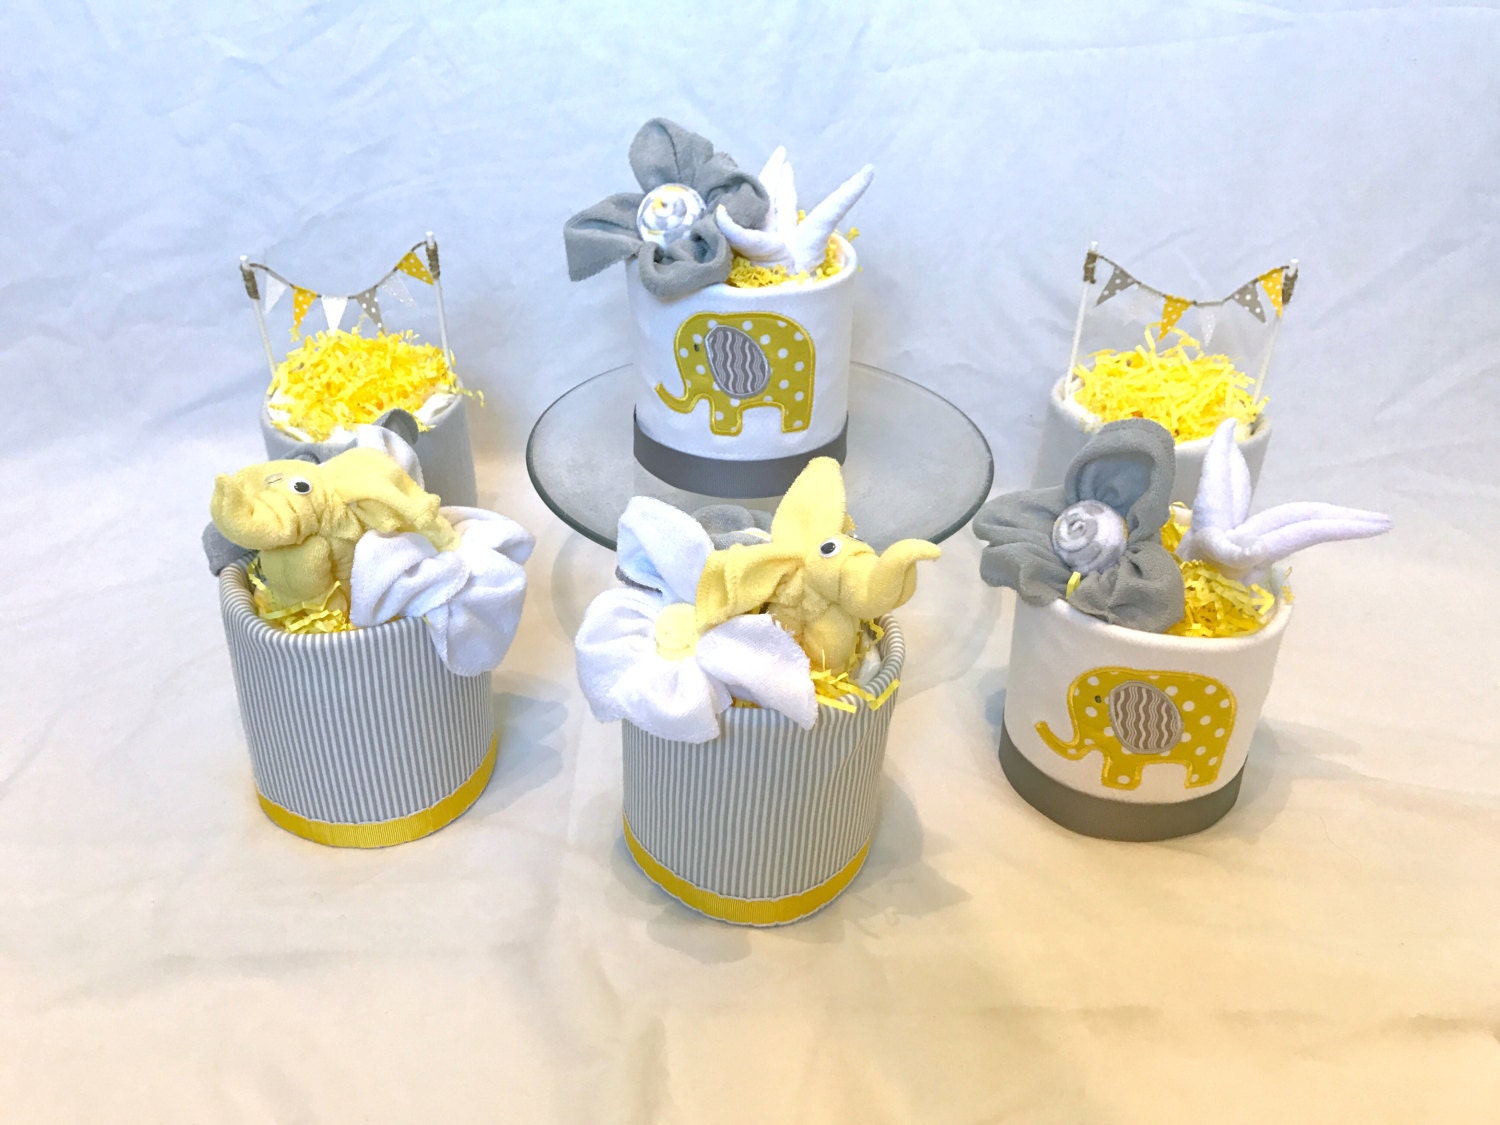 Elephant diaper cake set, Elephant Baby Shower Centerpieces, Yellow and Gray Baby Shower, Gray Elephant Diaper Cake, Diaper Cakes, Baby Gift